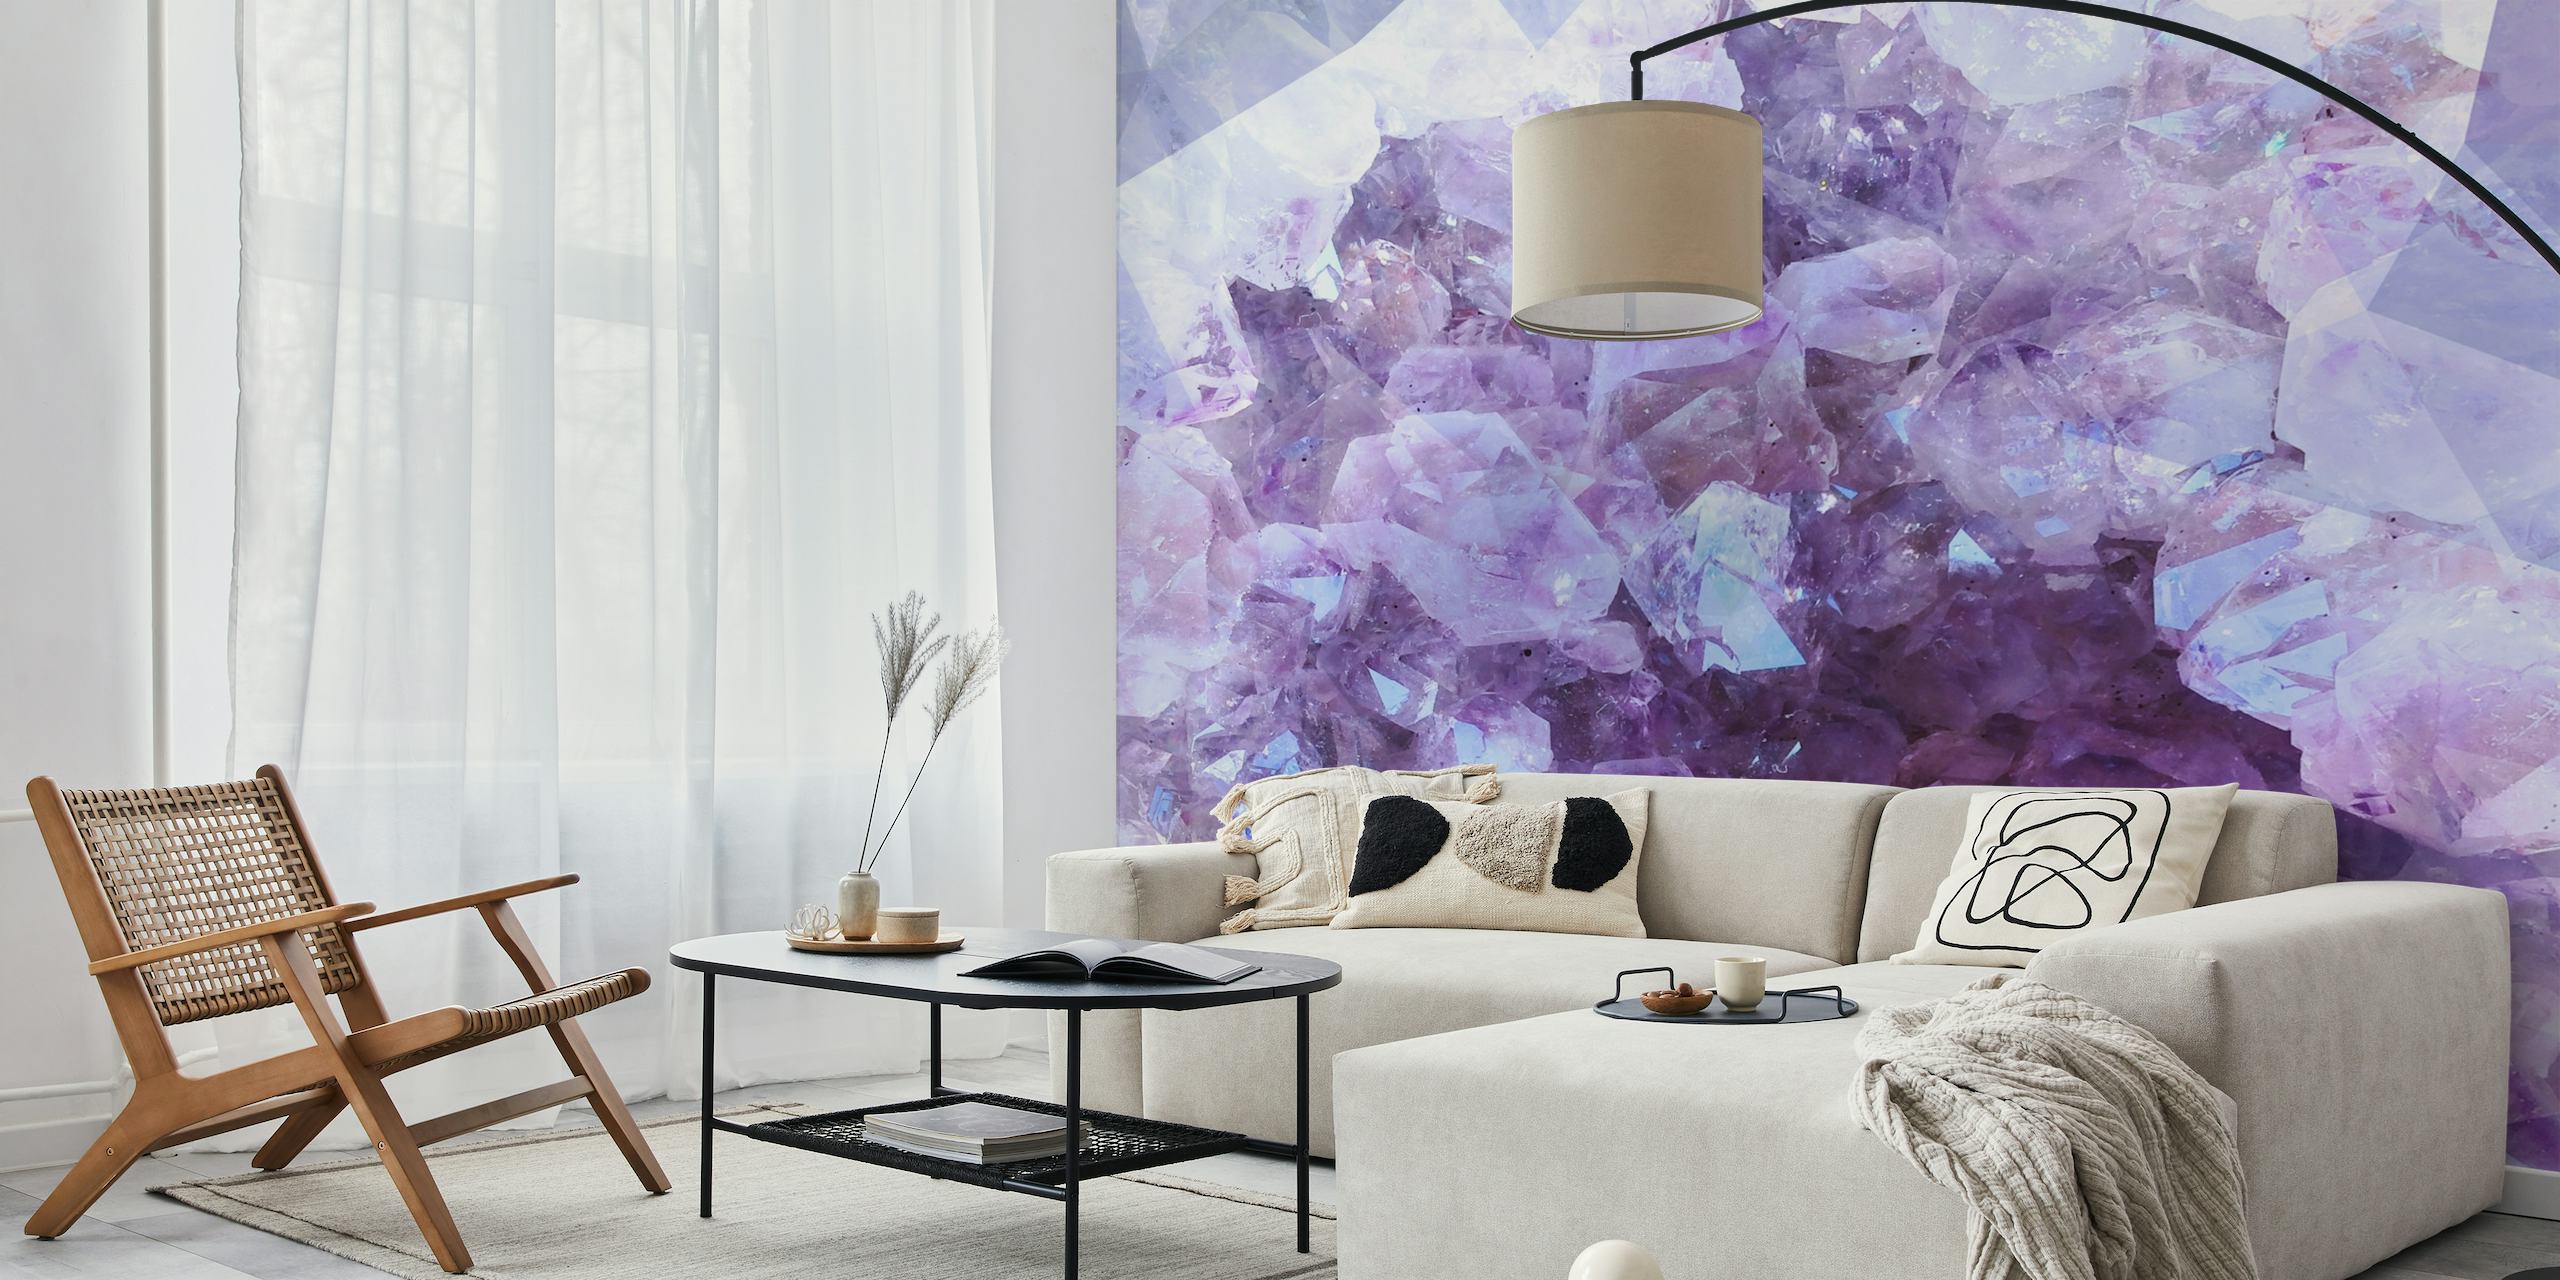 Ultraviolet Crystals wall mural with shades of purple, white, and blue, resembling natural amethyst clusters.